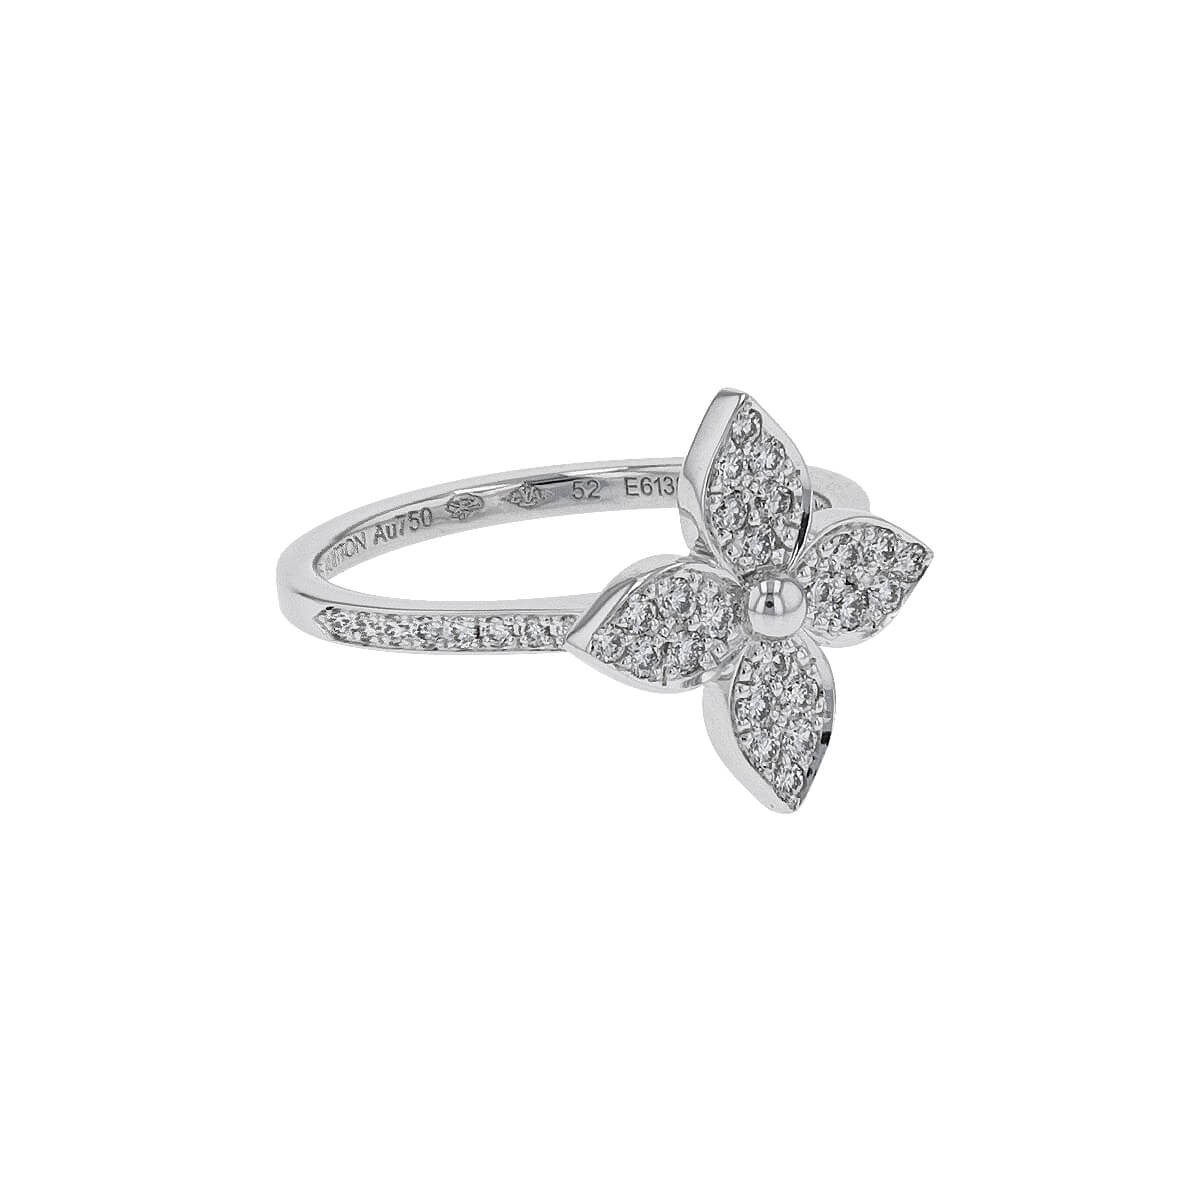 Louis Vuitton - Star Blossom Ring White Gold and Diamonds - Grey - Unisex - Size: 57 - Luxury